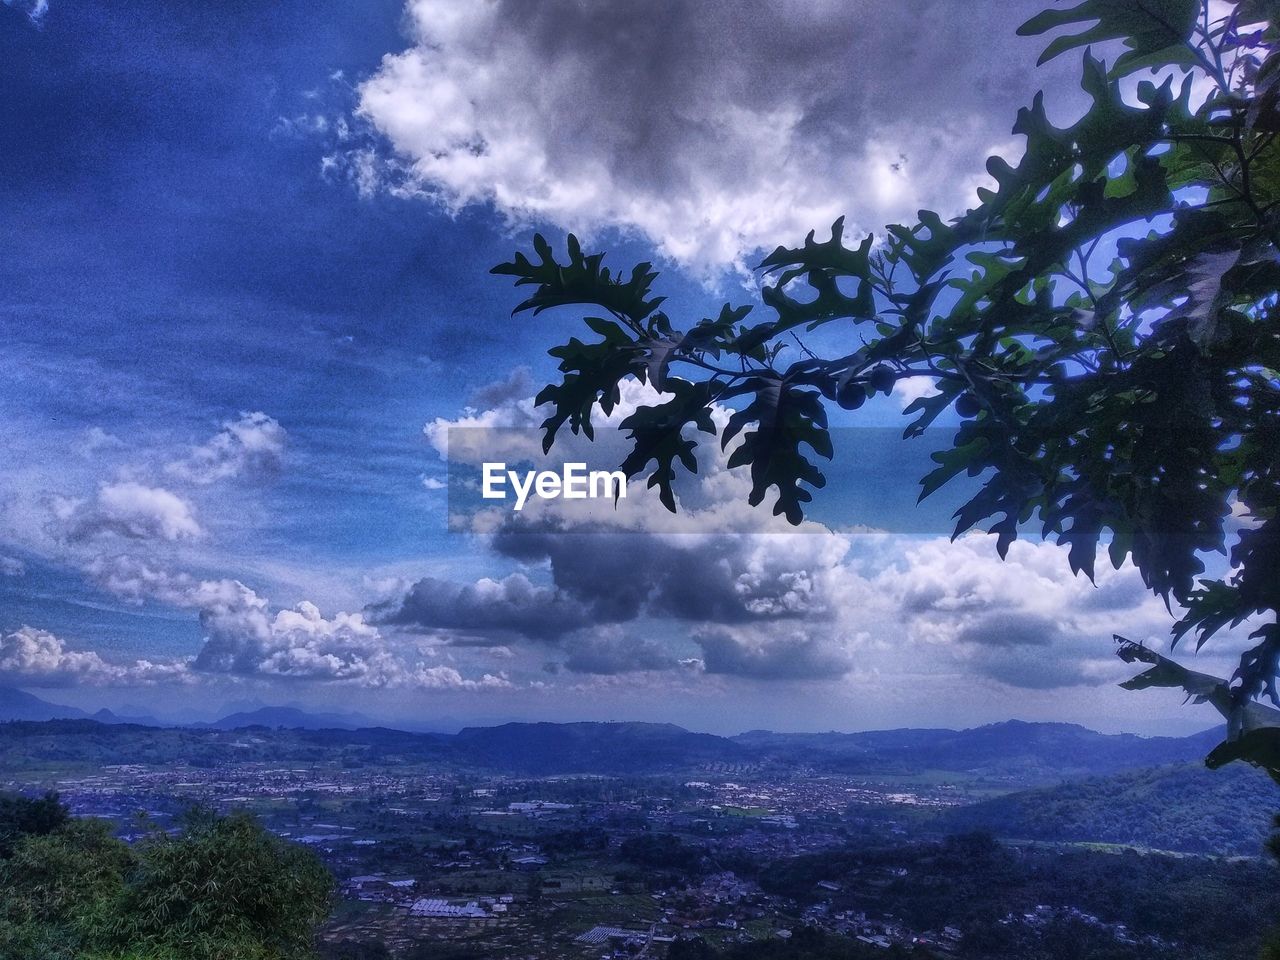 sky, tree, cloud, nature, plant, environment, beauty in nature, scenics - nature, landscape, mountain, sunlight, tranquility, no people, outdoors, horizon, tranquil scene, land, blue, morning, dramatic sky, travel destinations, growth, cloudscape, city, forest